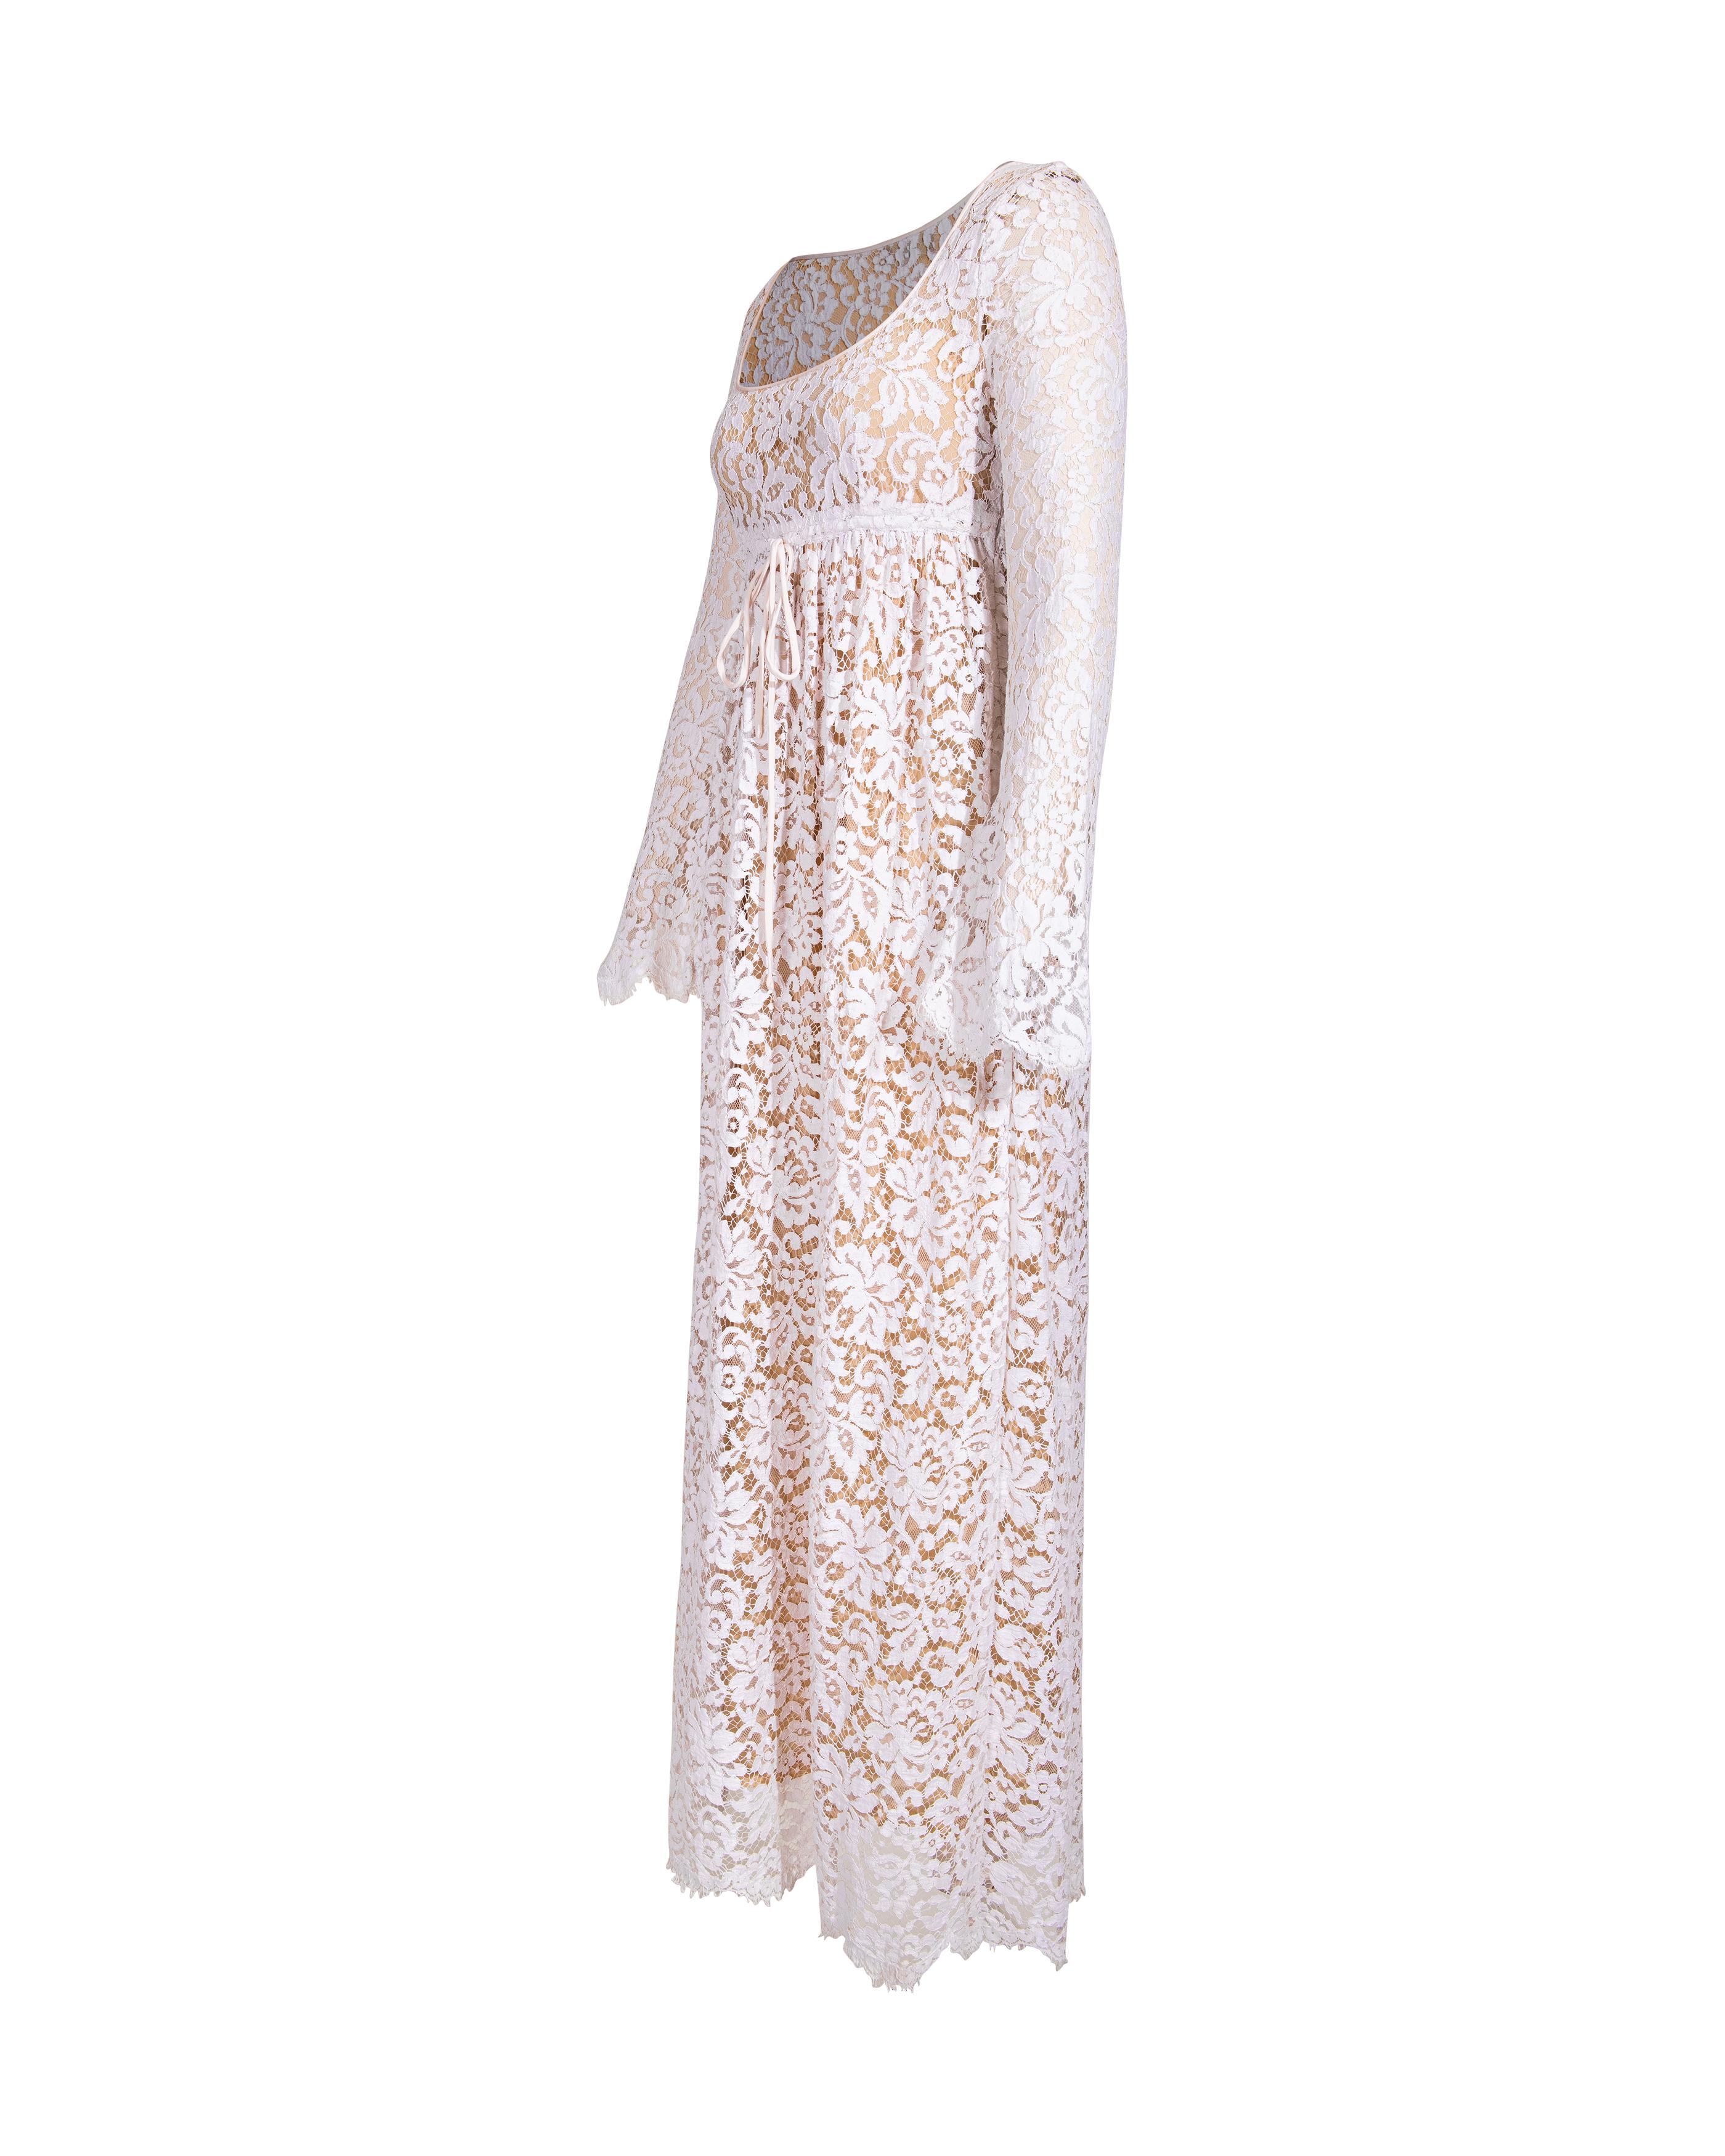 S/S 1996 Gucci by Tom Ford White Lace Gown with Nude Lining In Excellent Condition In North Hollywood, CA